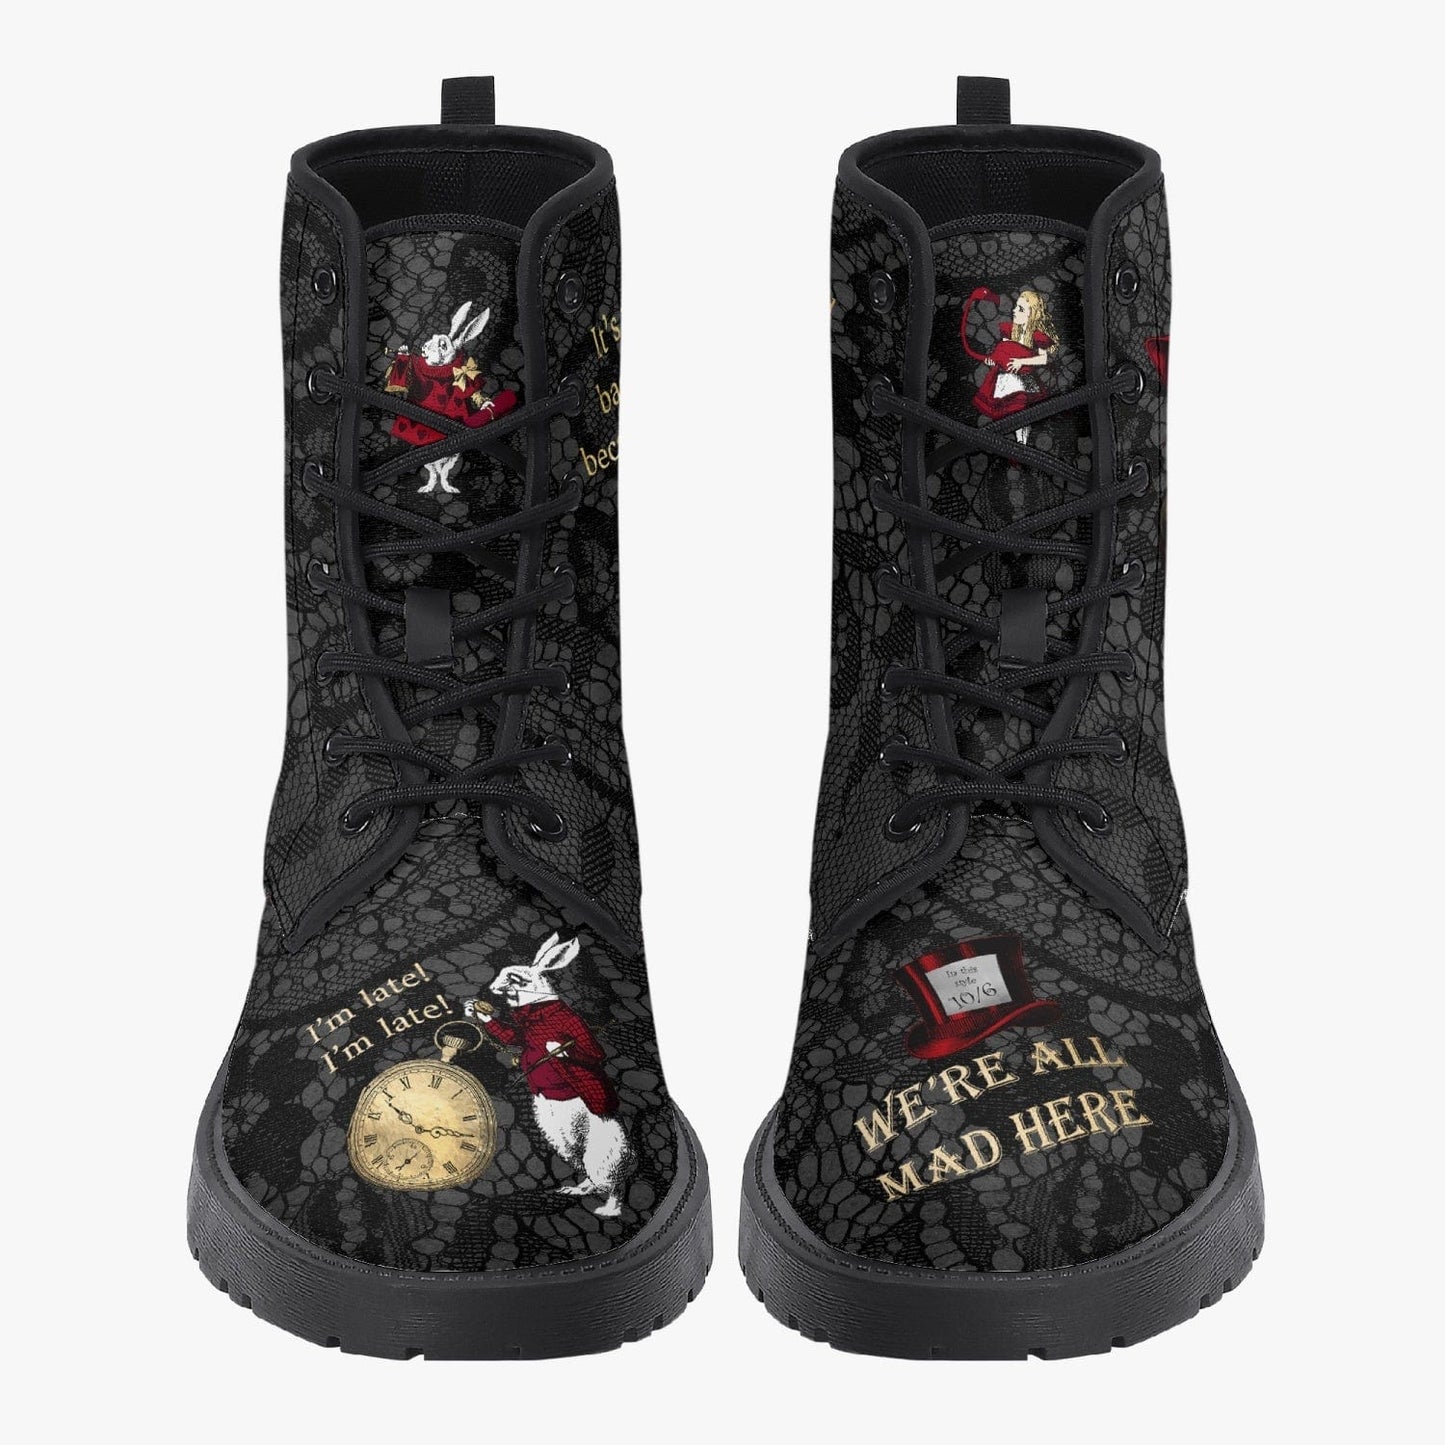 gothic black gold and red vegan boots featuring Alice in Wonderland quotes 4